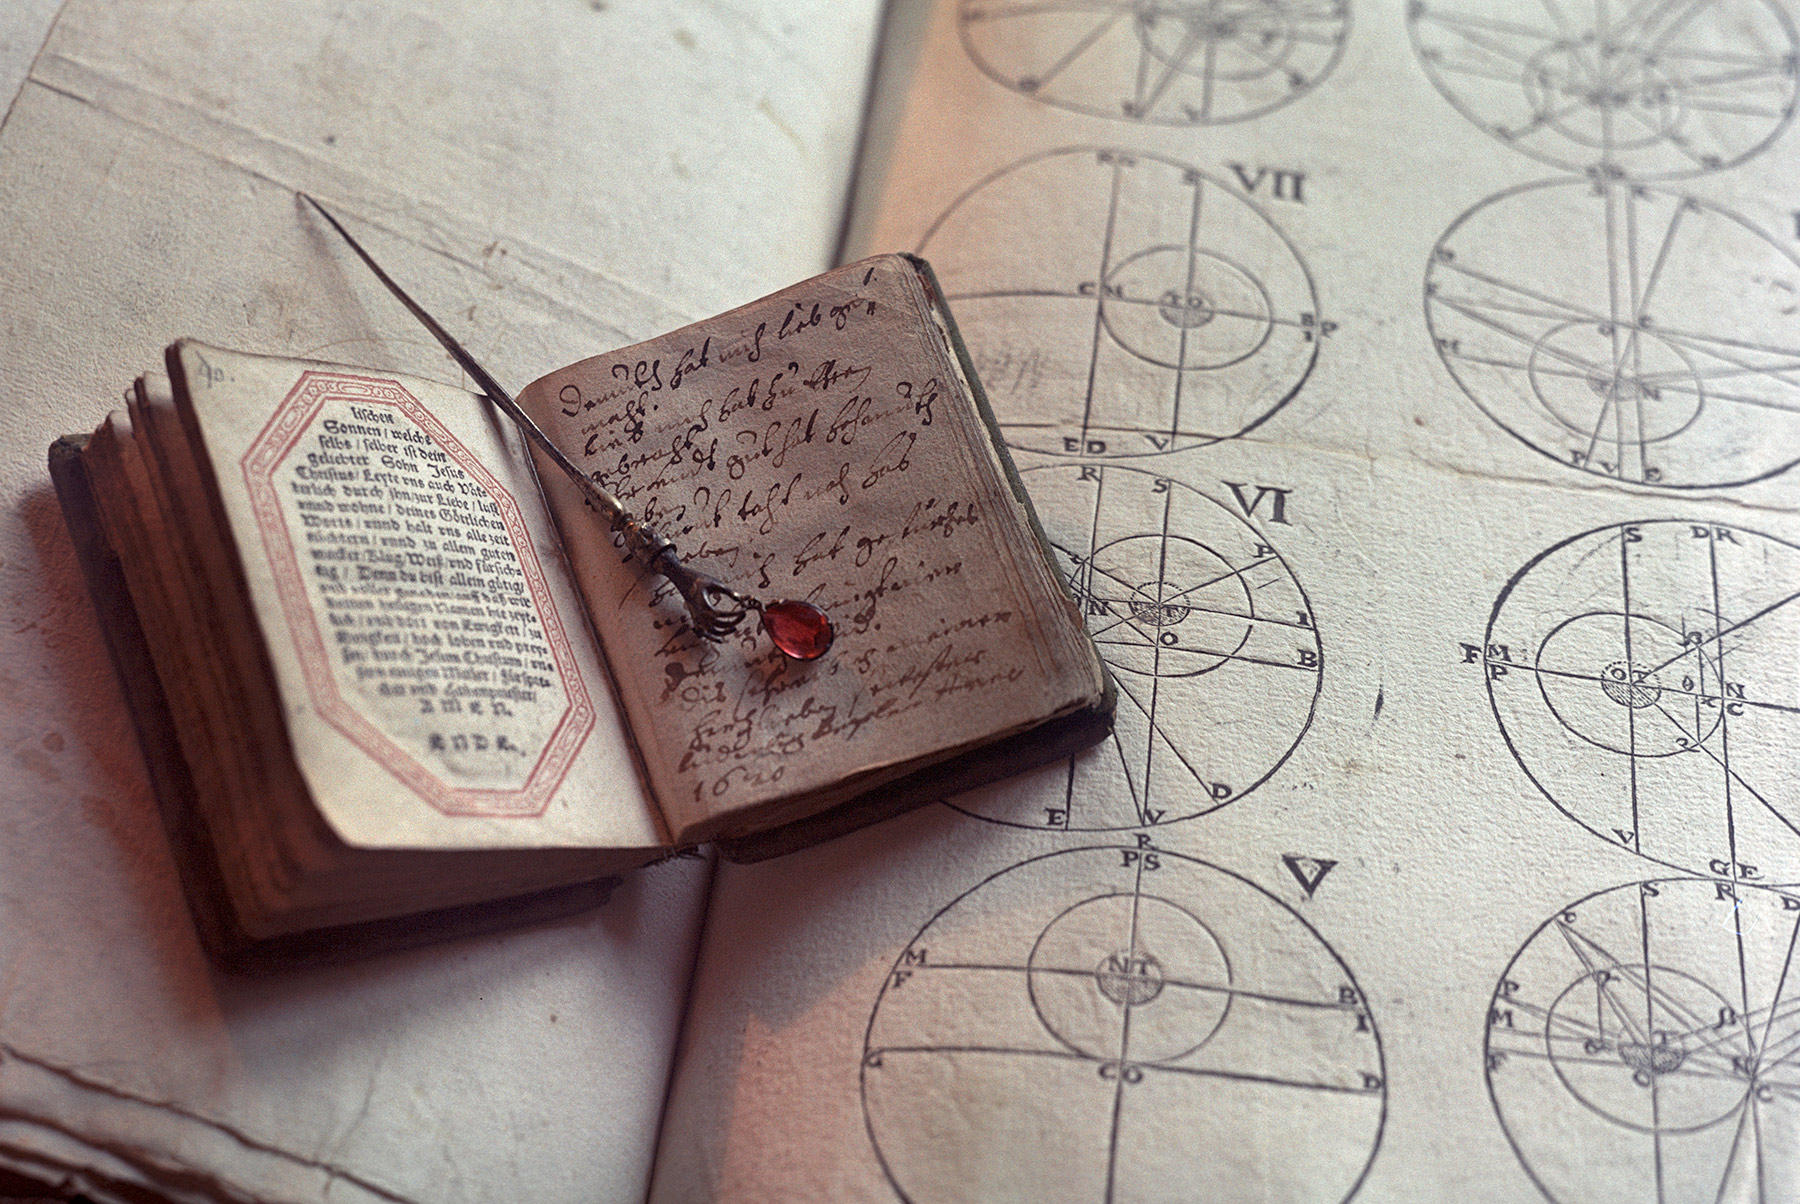 Johannes Kepler's prayer book and his wife's hairpin on a manuscript of his work.